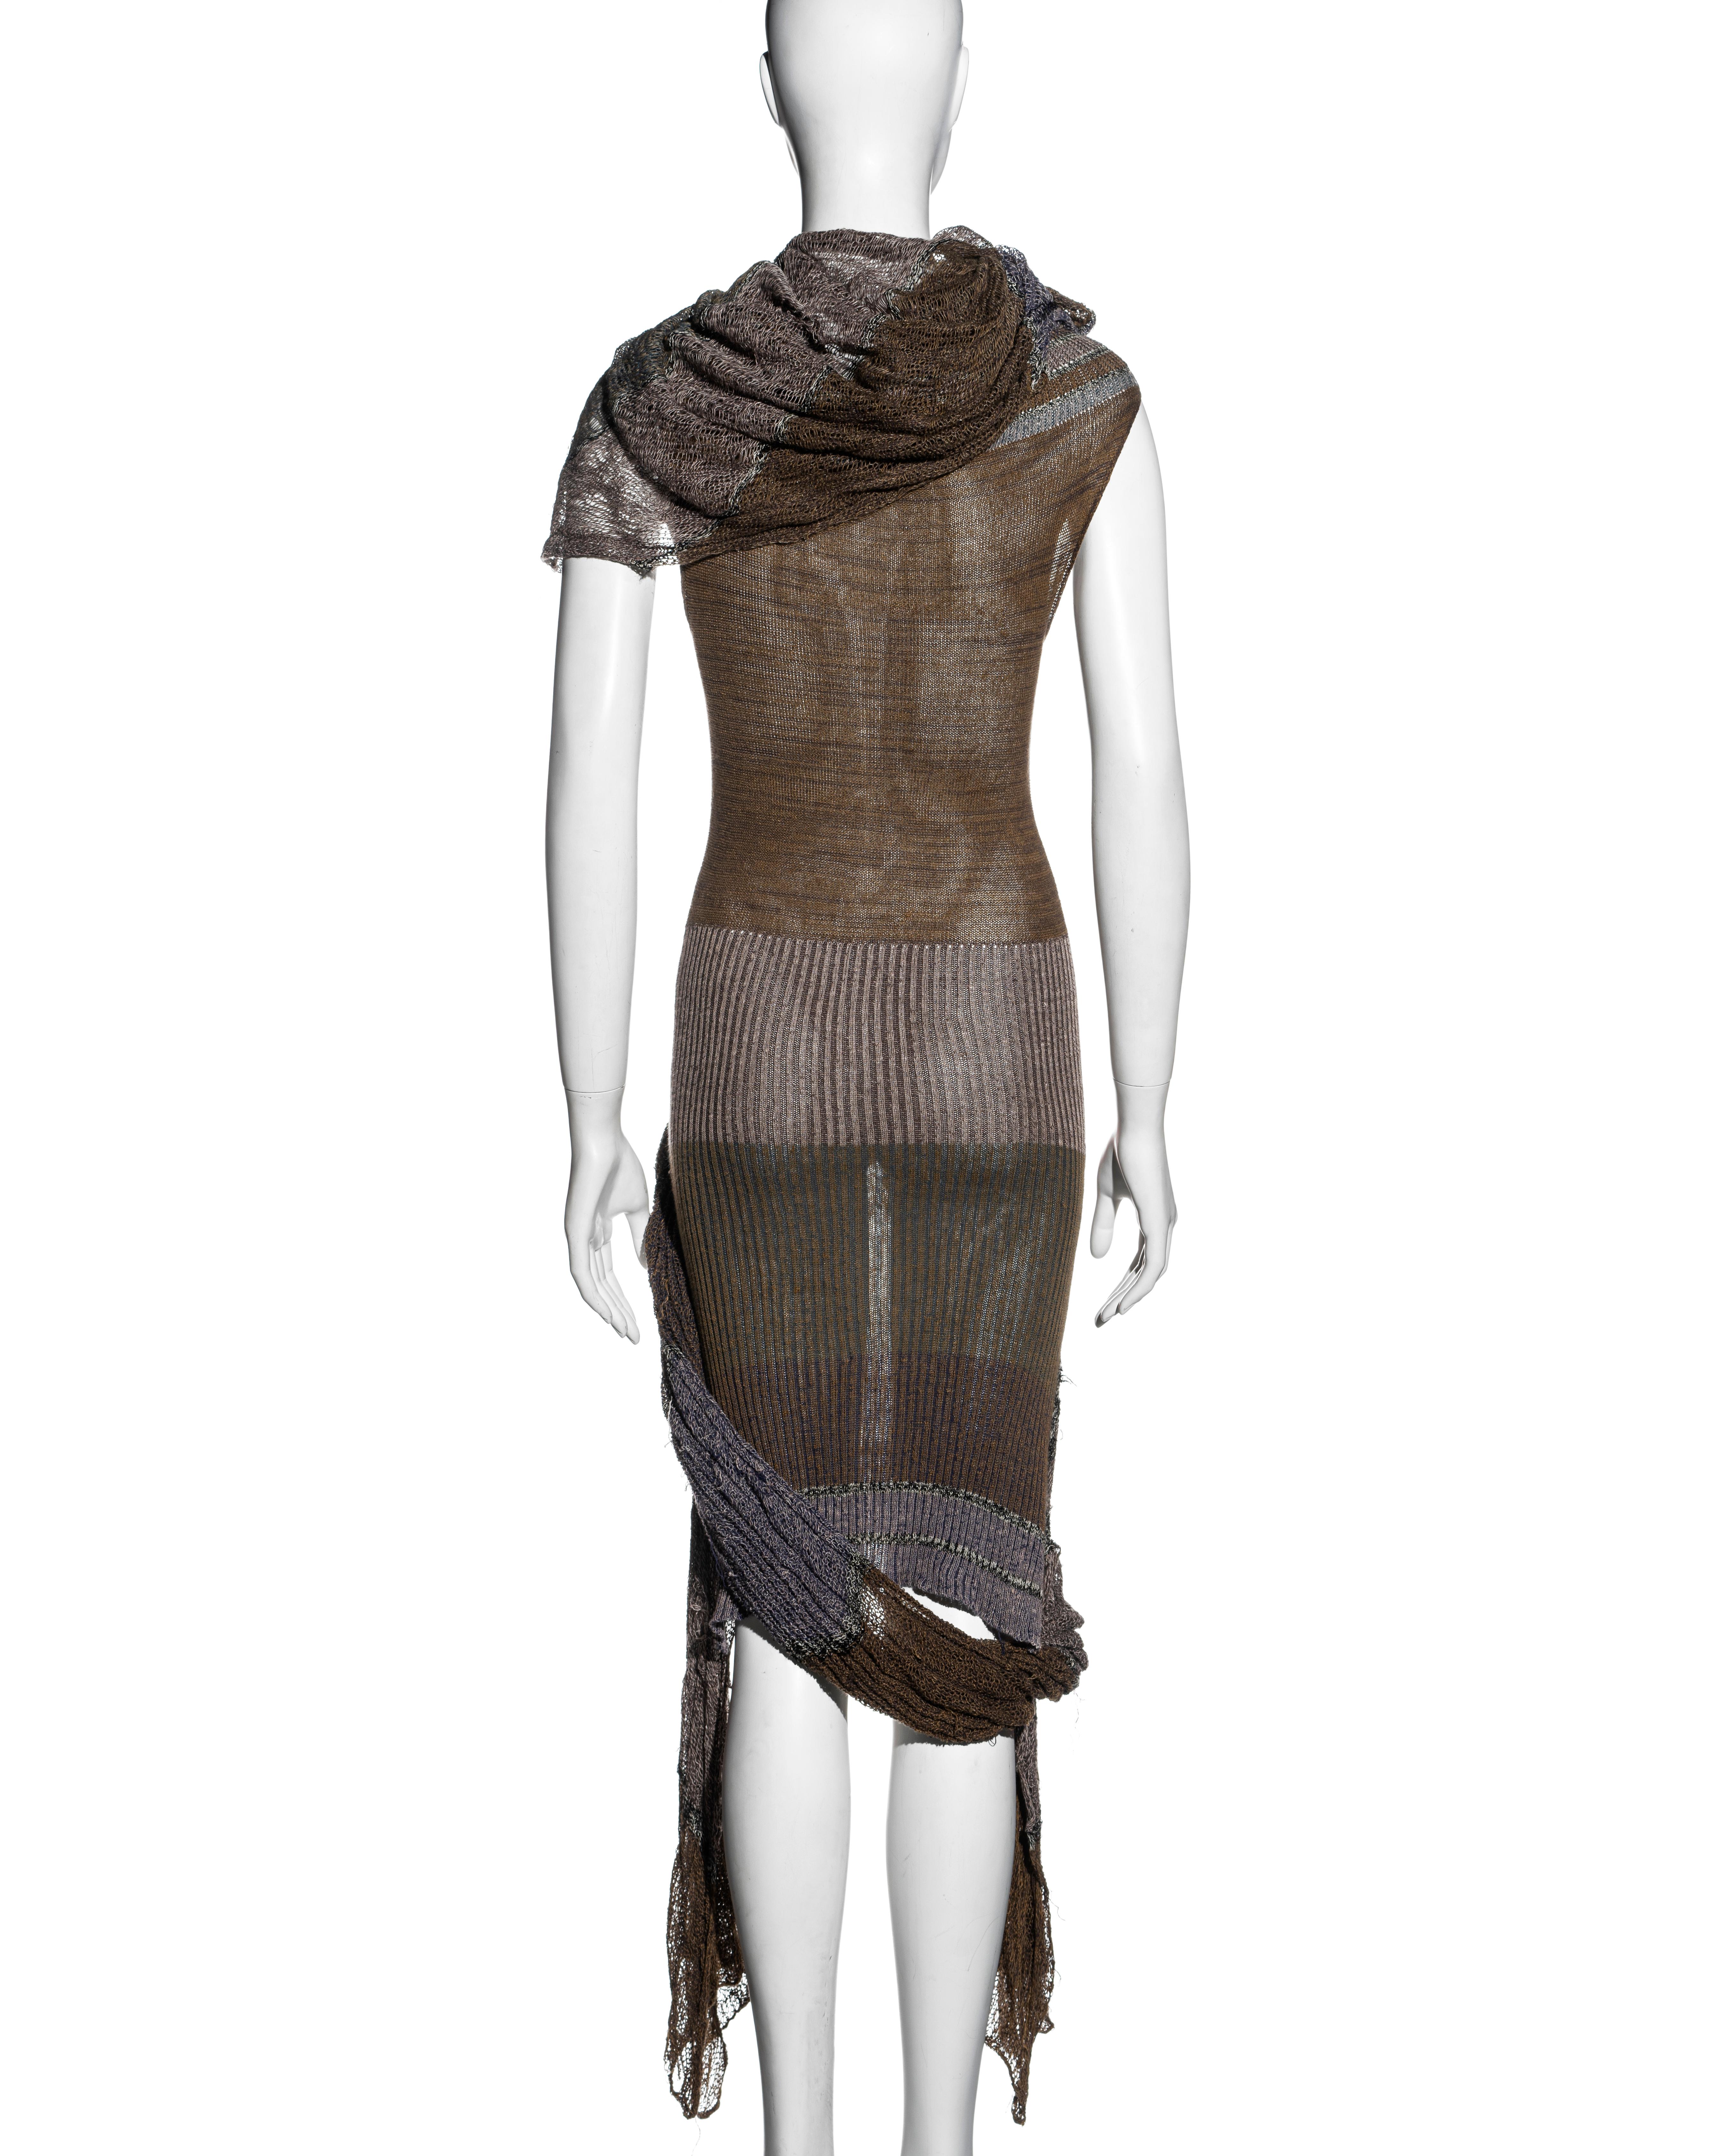 Vivienne Westwood striped open knit dress with tubular scarf, ss 2005 For Sale 3